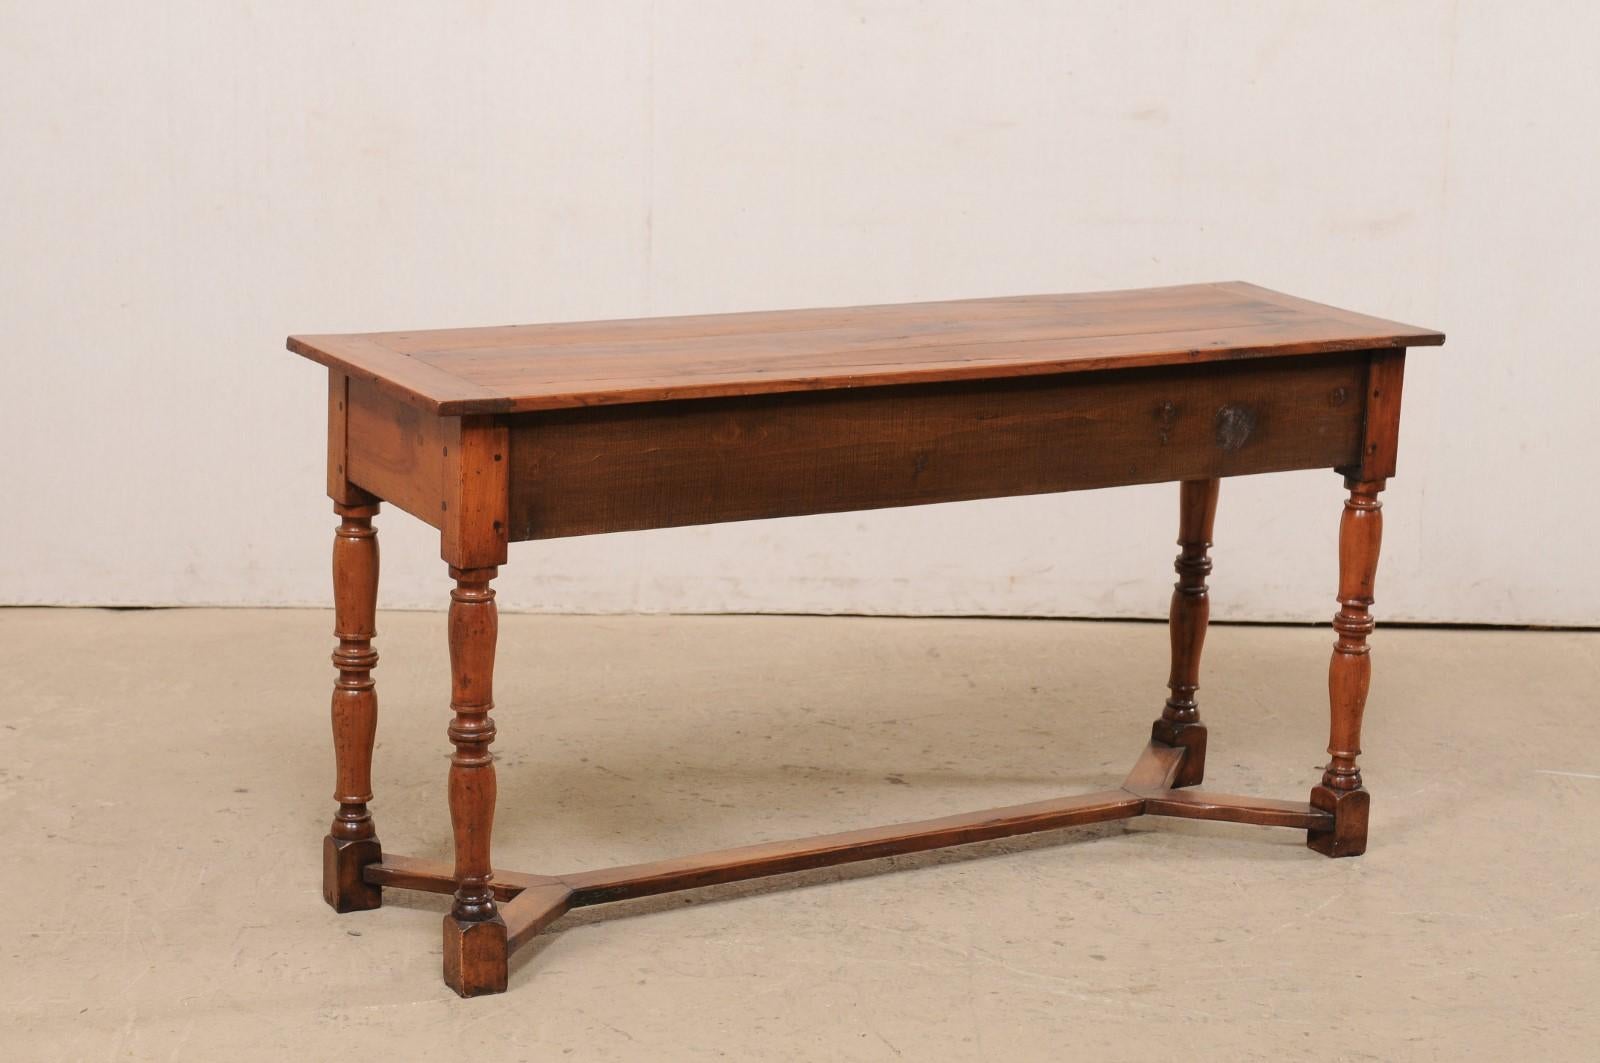 19th C. English Wooden Sofa or Console Table w/ 3 Drawers and Nicely Turned Legs 5